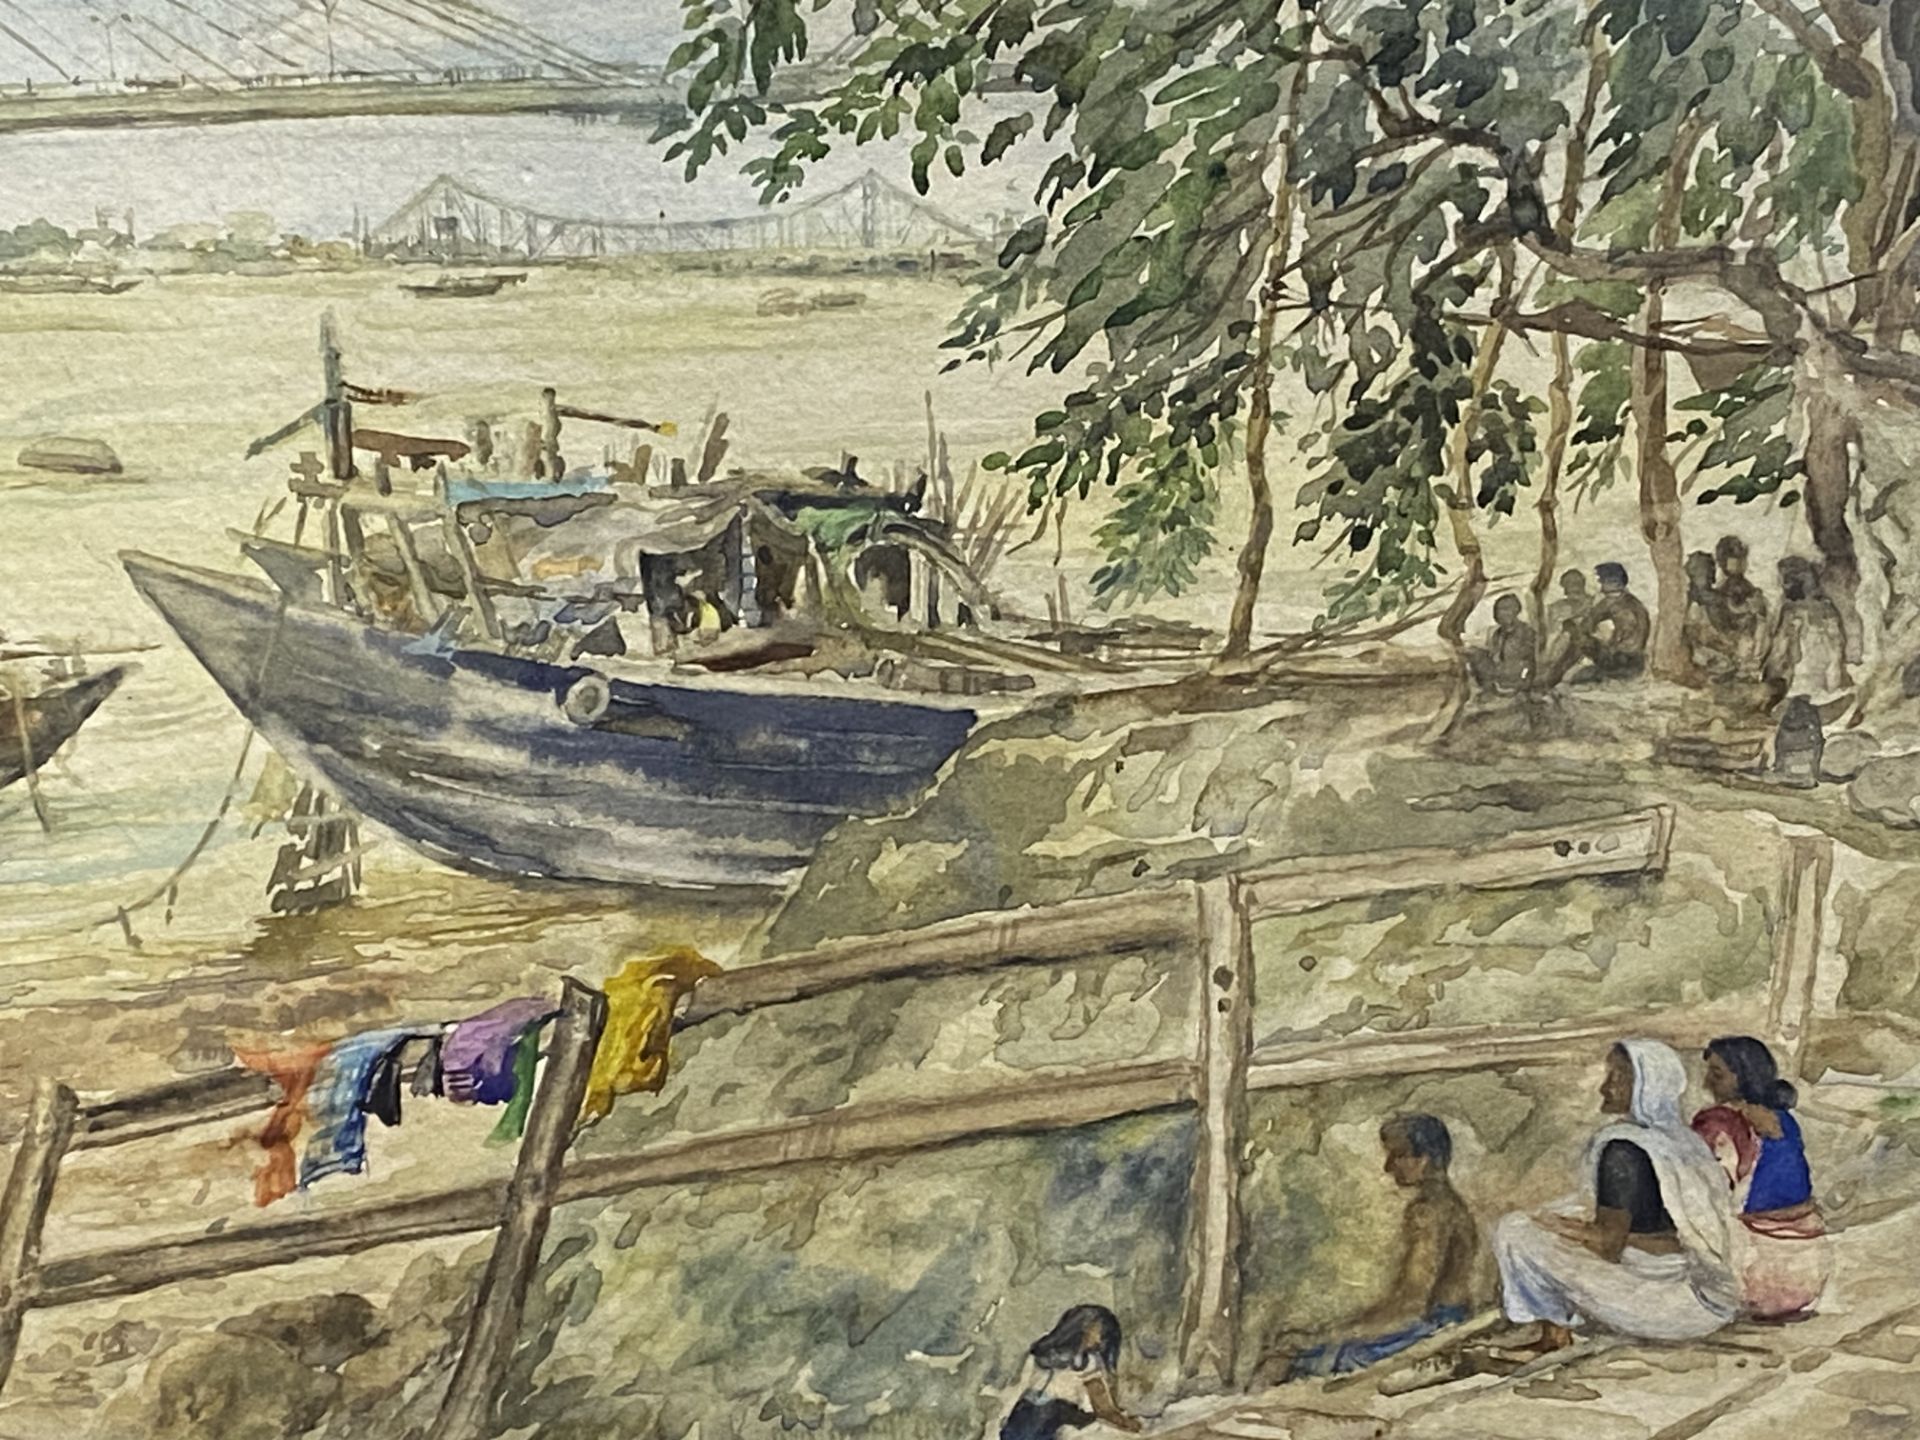 Framed and glazed 19th century watercolour of a river scene in India, signed by artist - Image 2 of 5